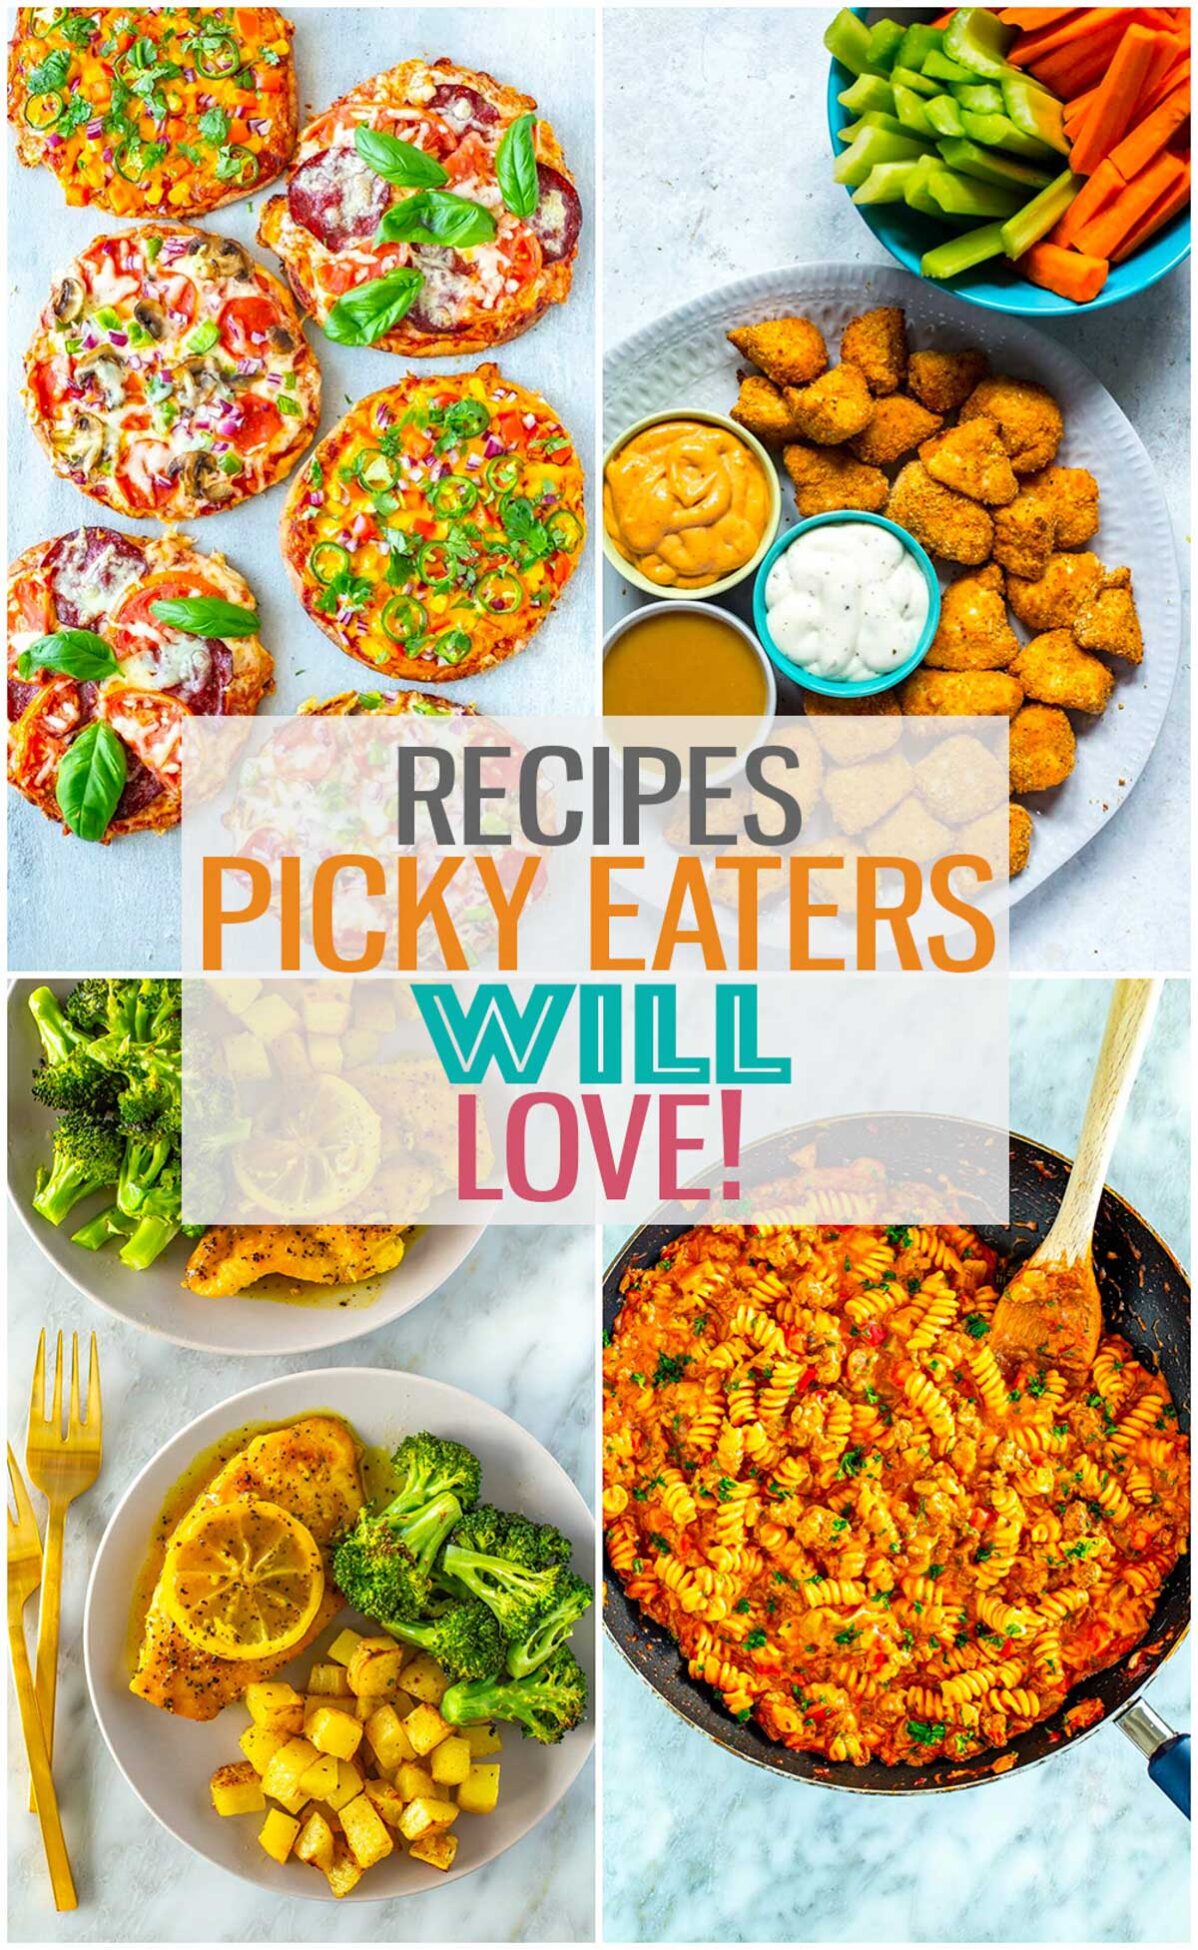 A collage of 4 different recipes with the text "Recipes Picky Eaters Will Love!" layered over top.